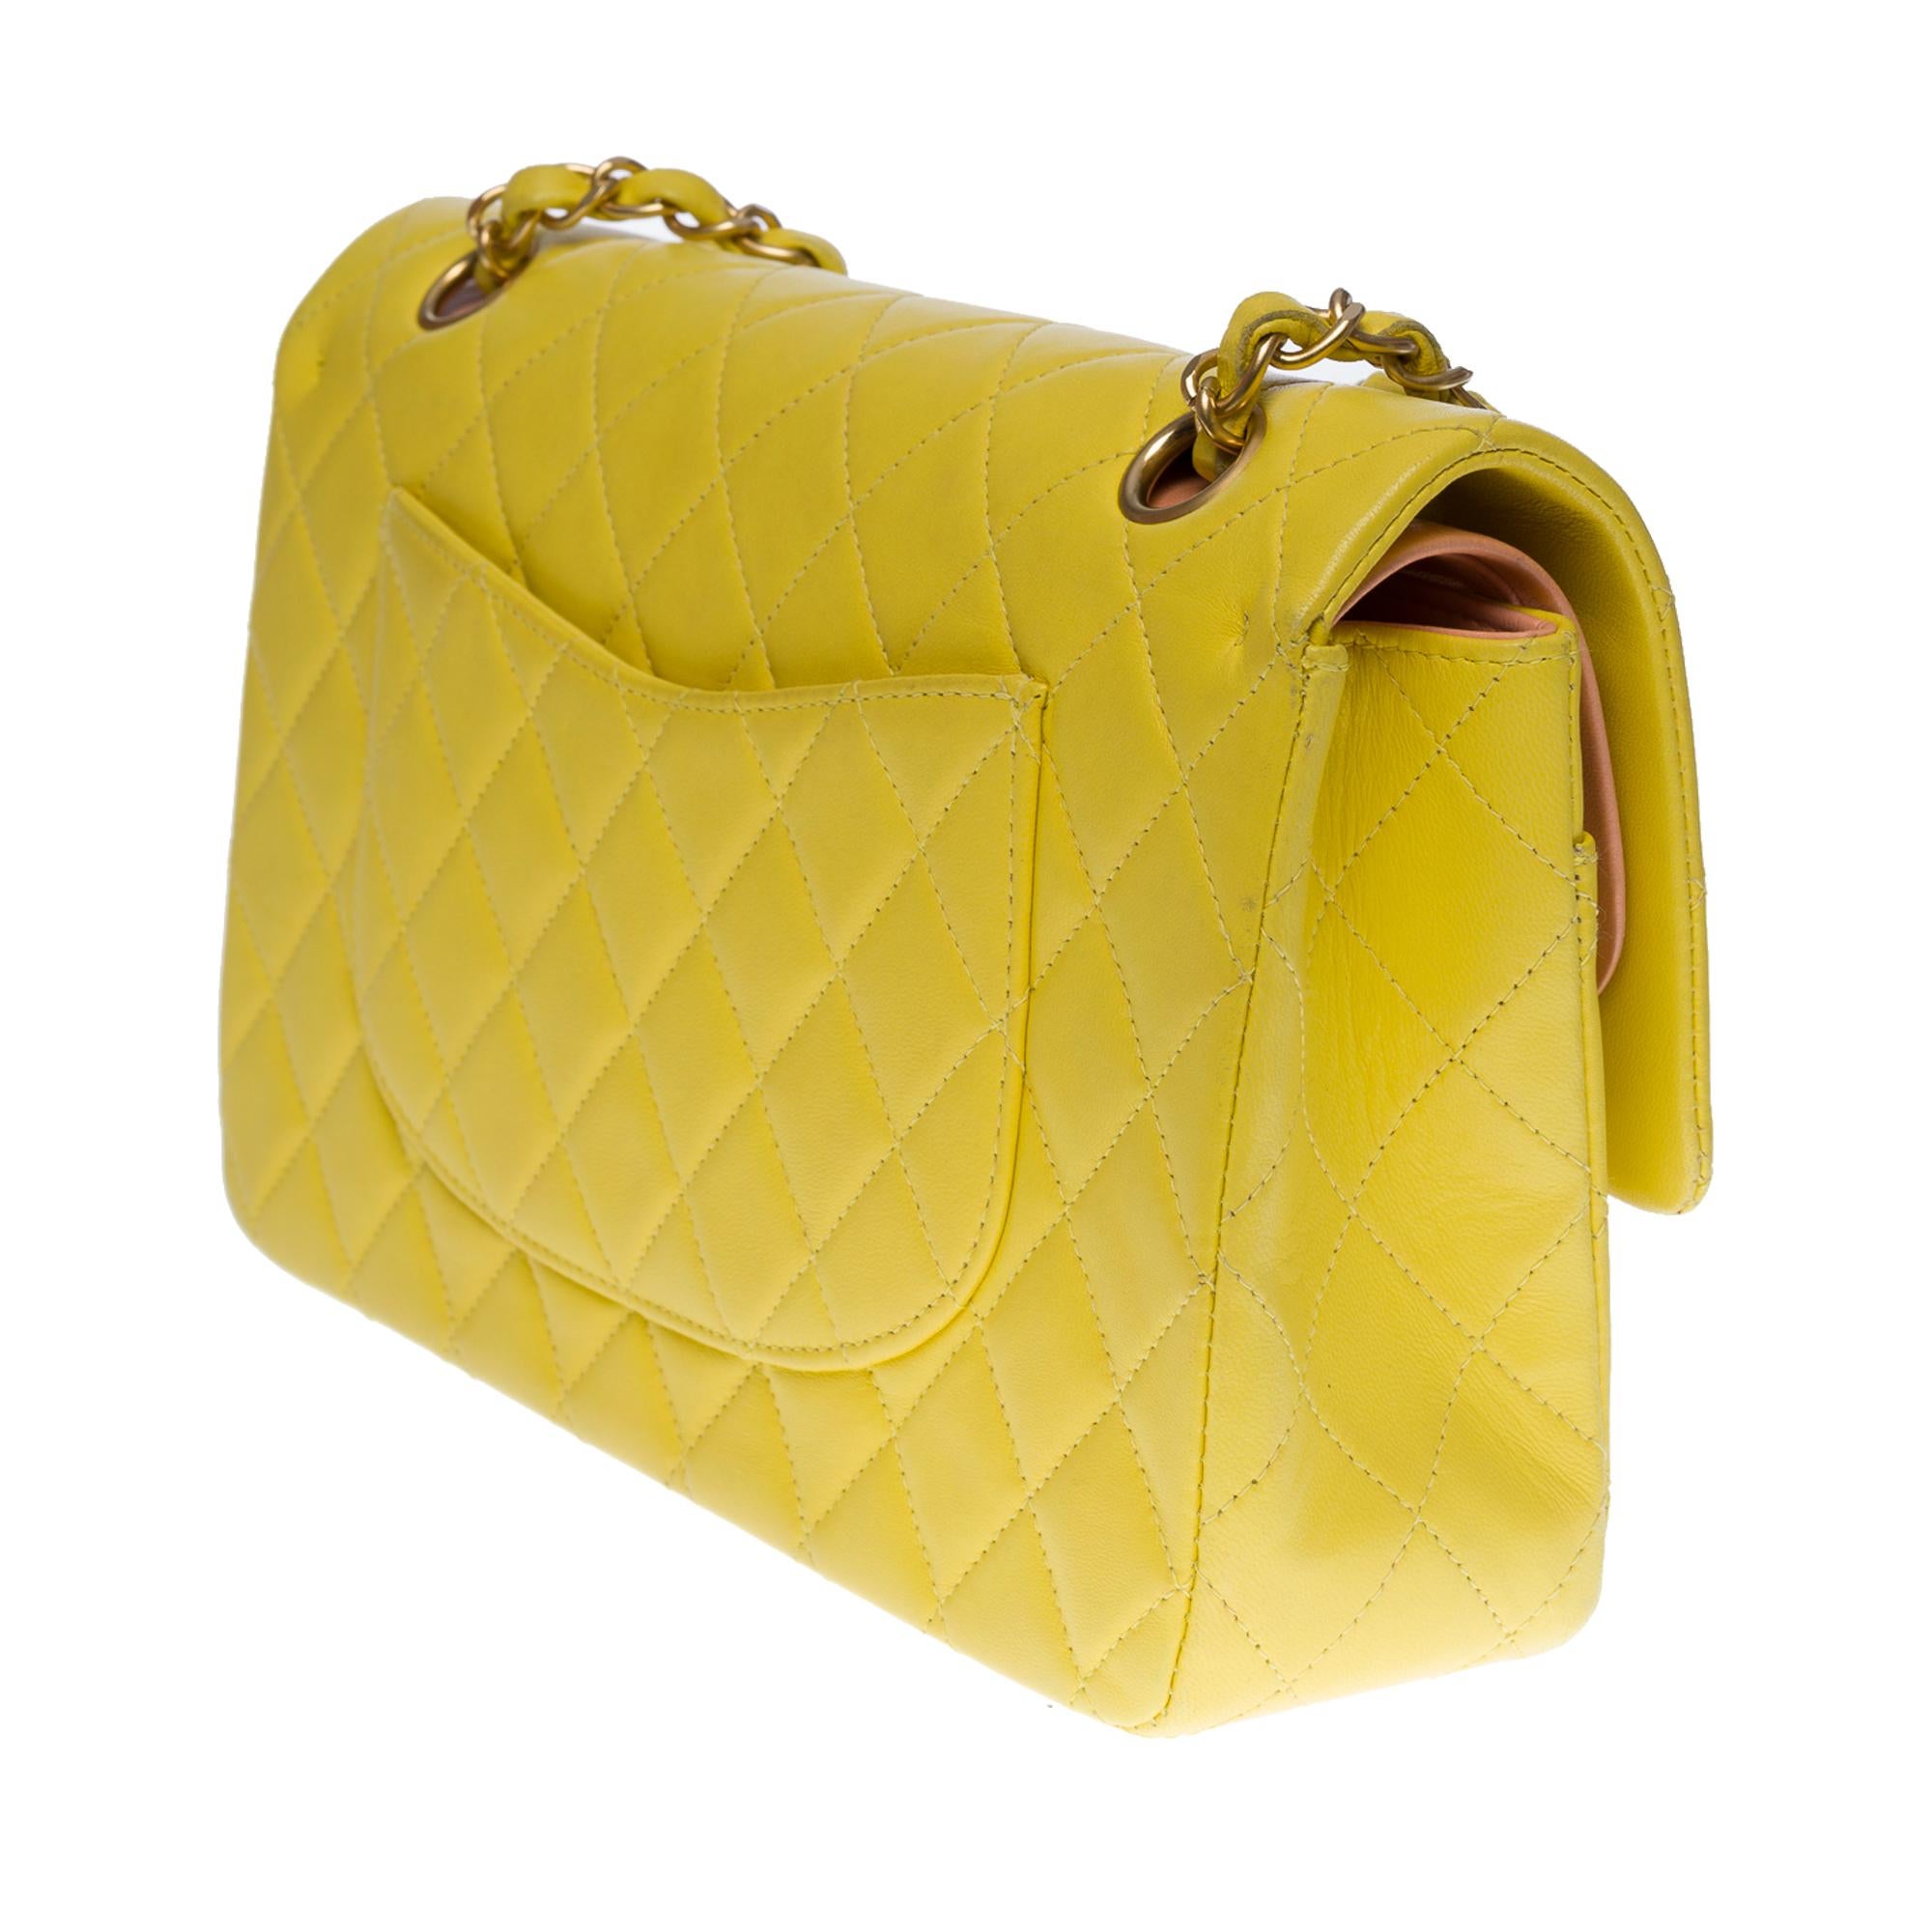 Chanel Timeless Medium double flap shoulder bag in Yellow quilted lambskin , BGHW 1